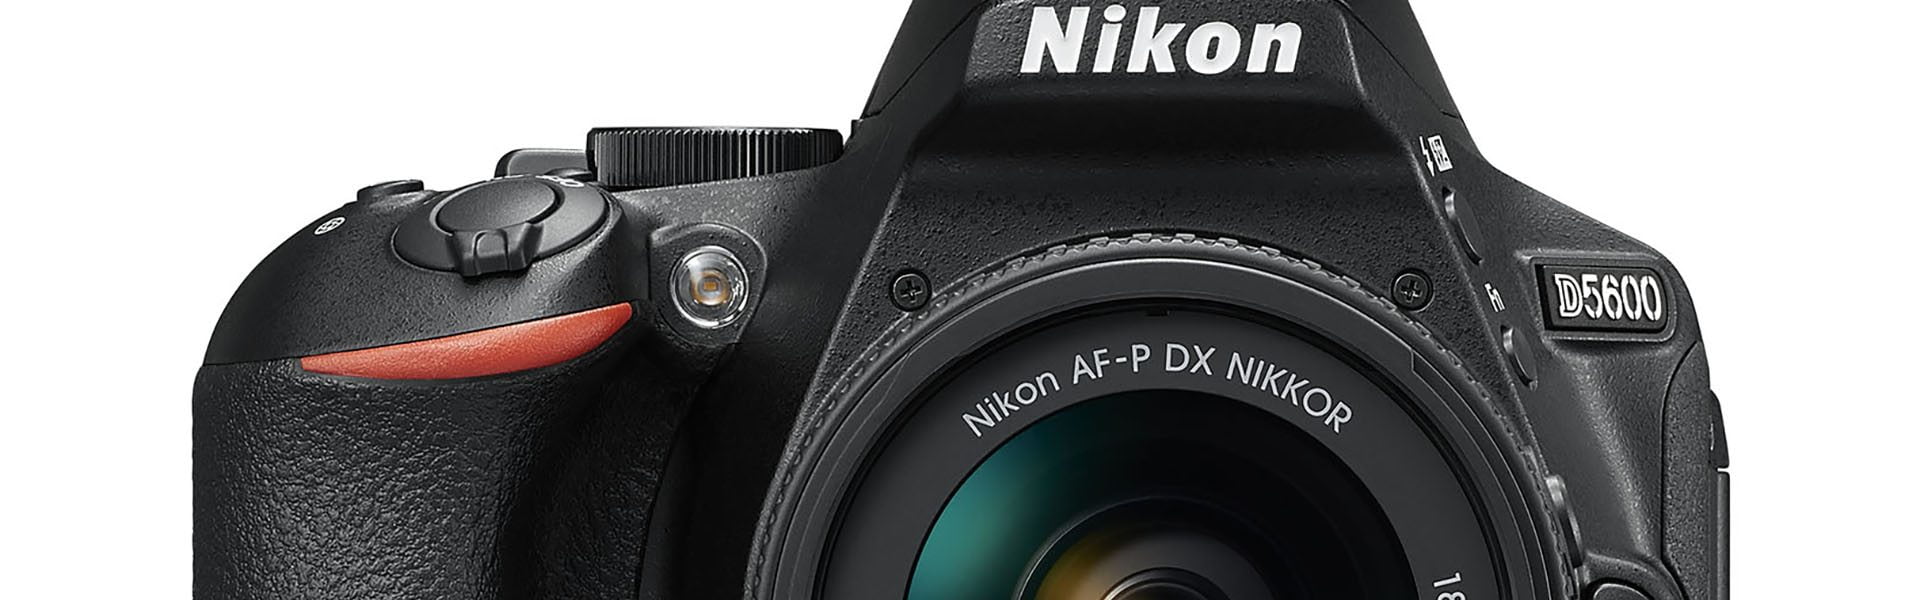 Capture Creatively, Share Easily with the New Nikon D5600 17